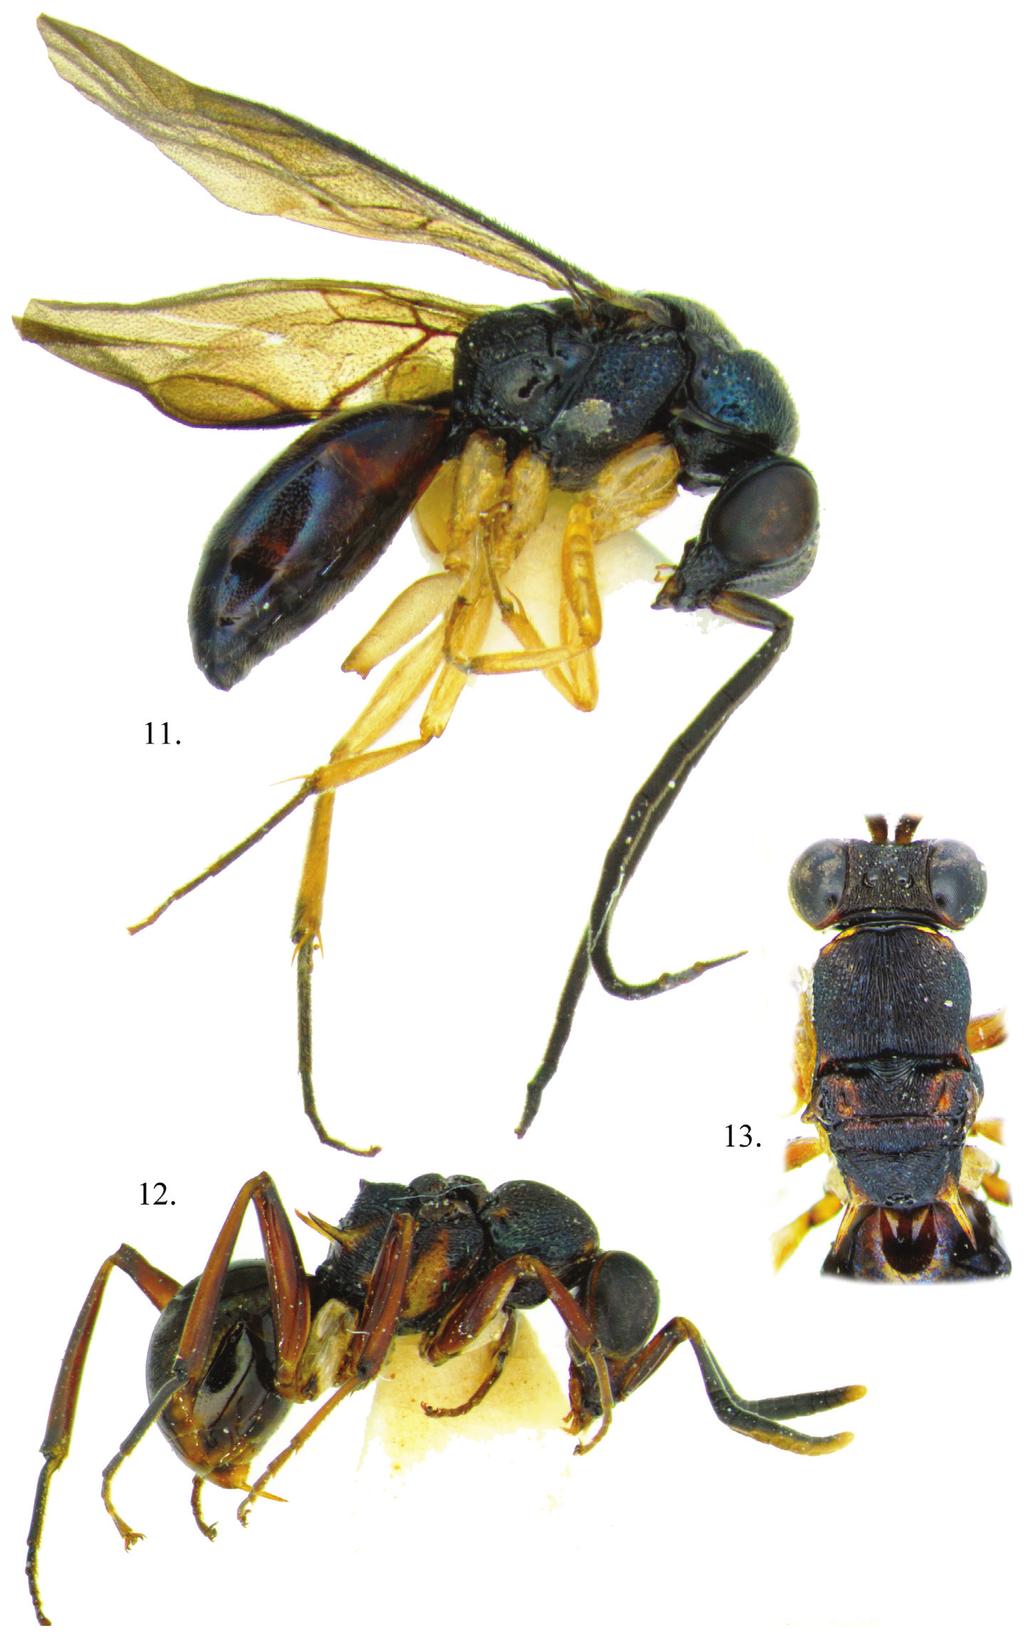 New species of egg parasites from the Oil Palm Stick Insect (Eurycantha insularis).